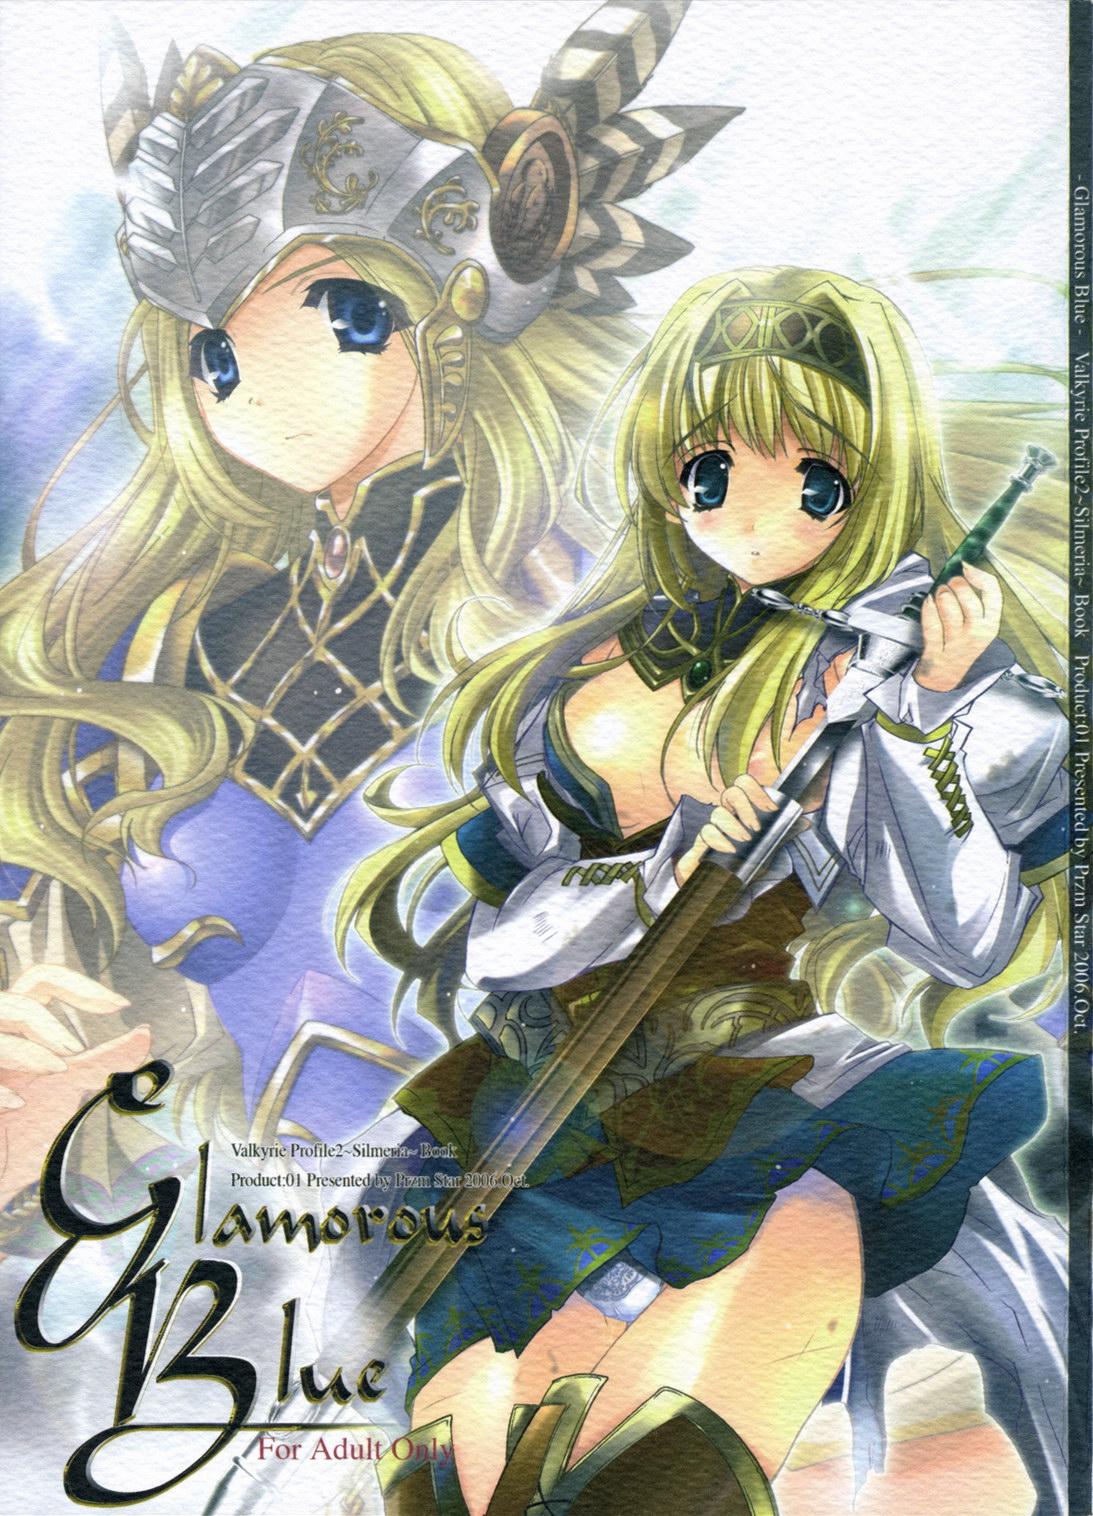 Nylons Glamorous Blue - Valkyrie profile Porn - Picture 1